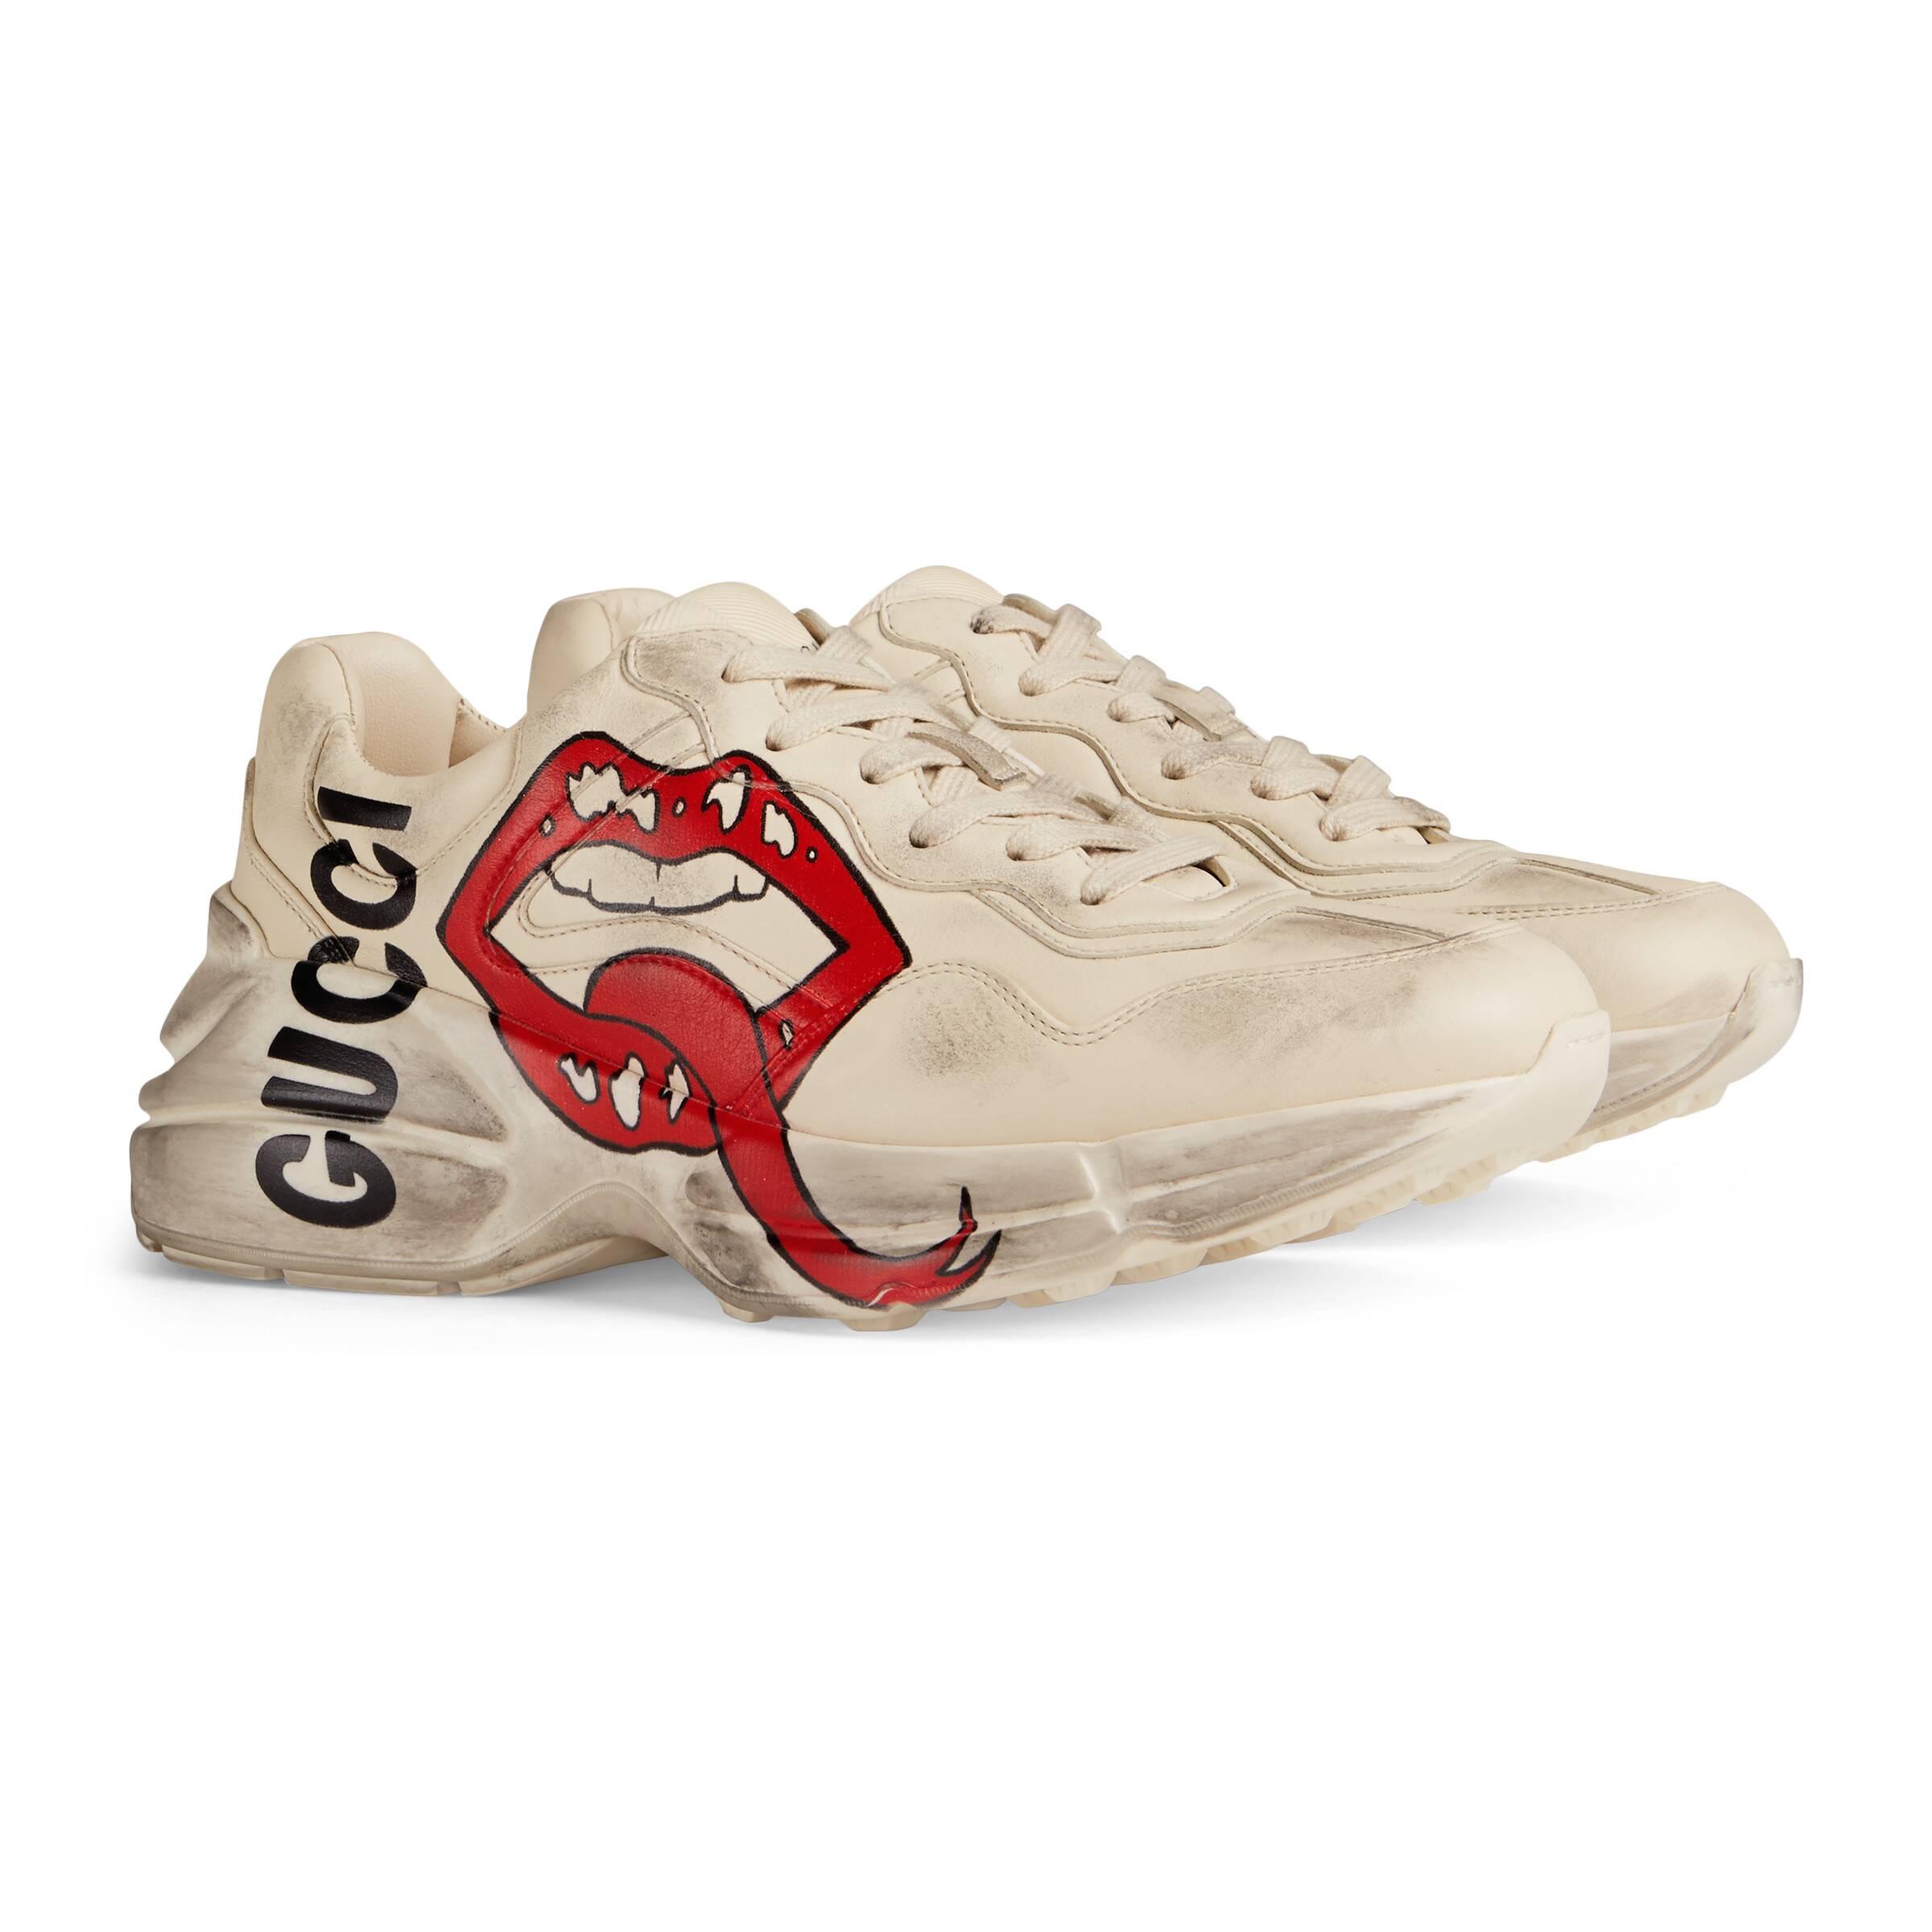 Gucci Rhyton Leather Sneakers With Maxi Mouth Print in Ivory (White ...